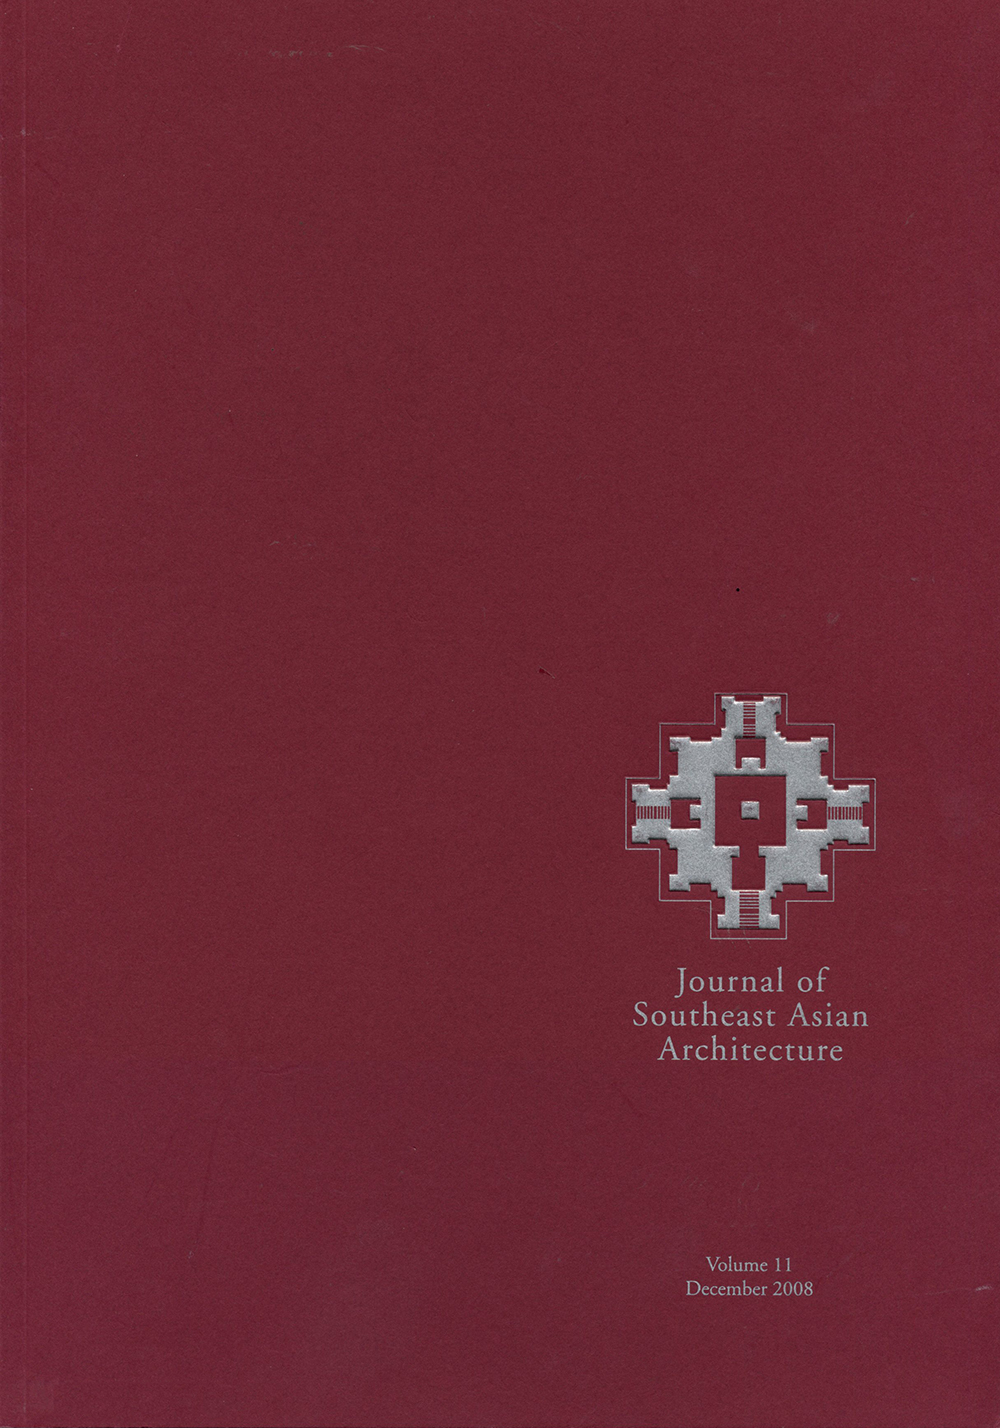 Journal of Southeast Asian Architecture (Volume 11)